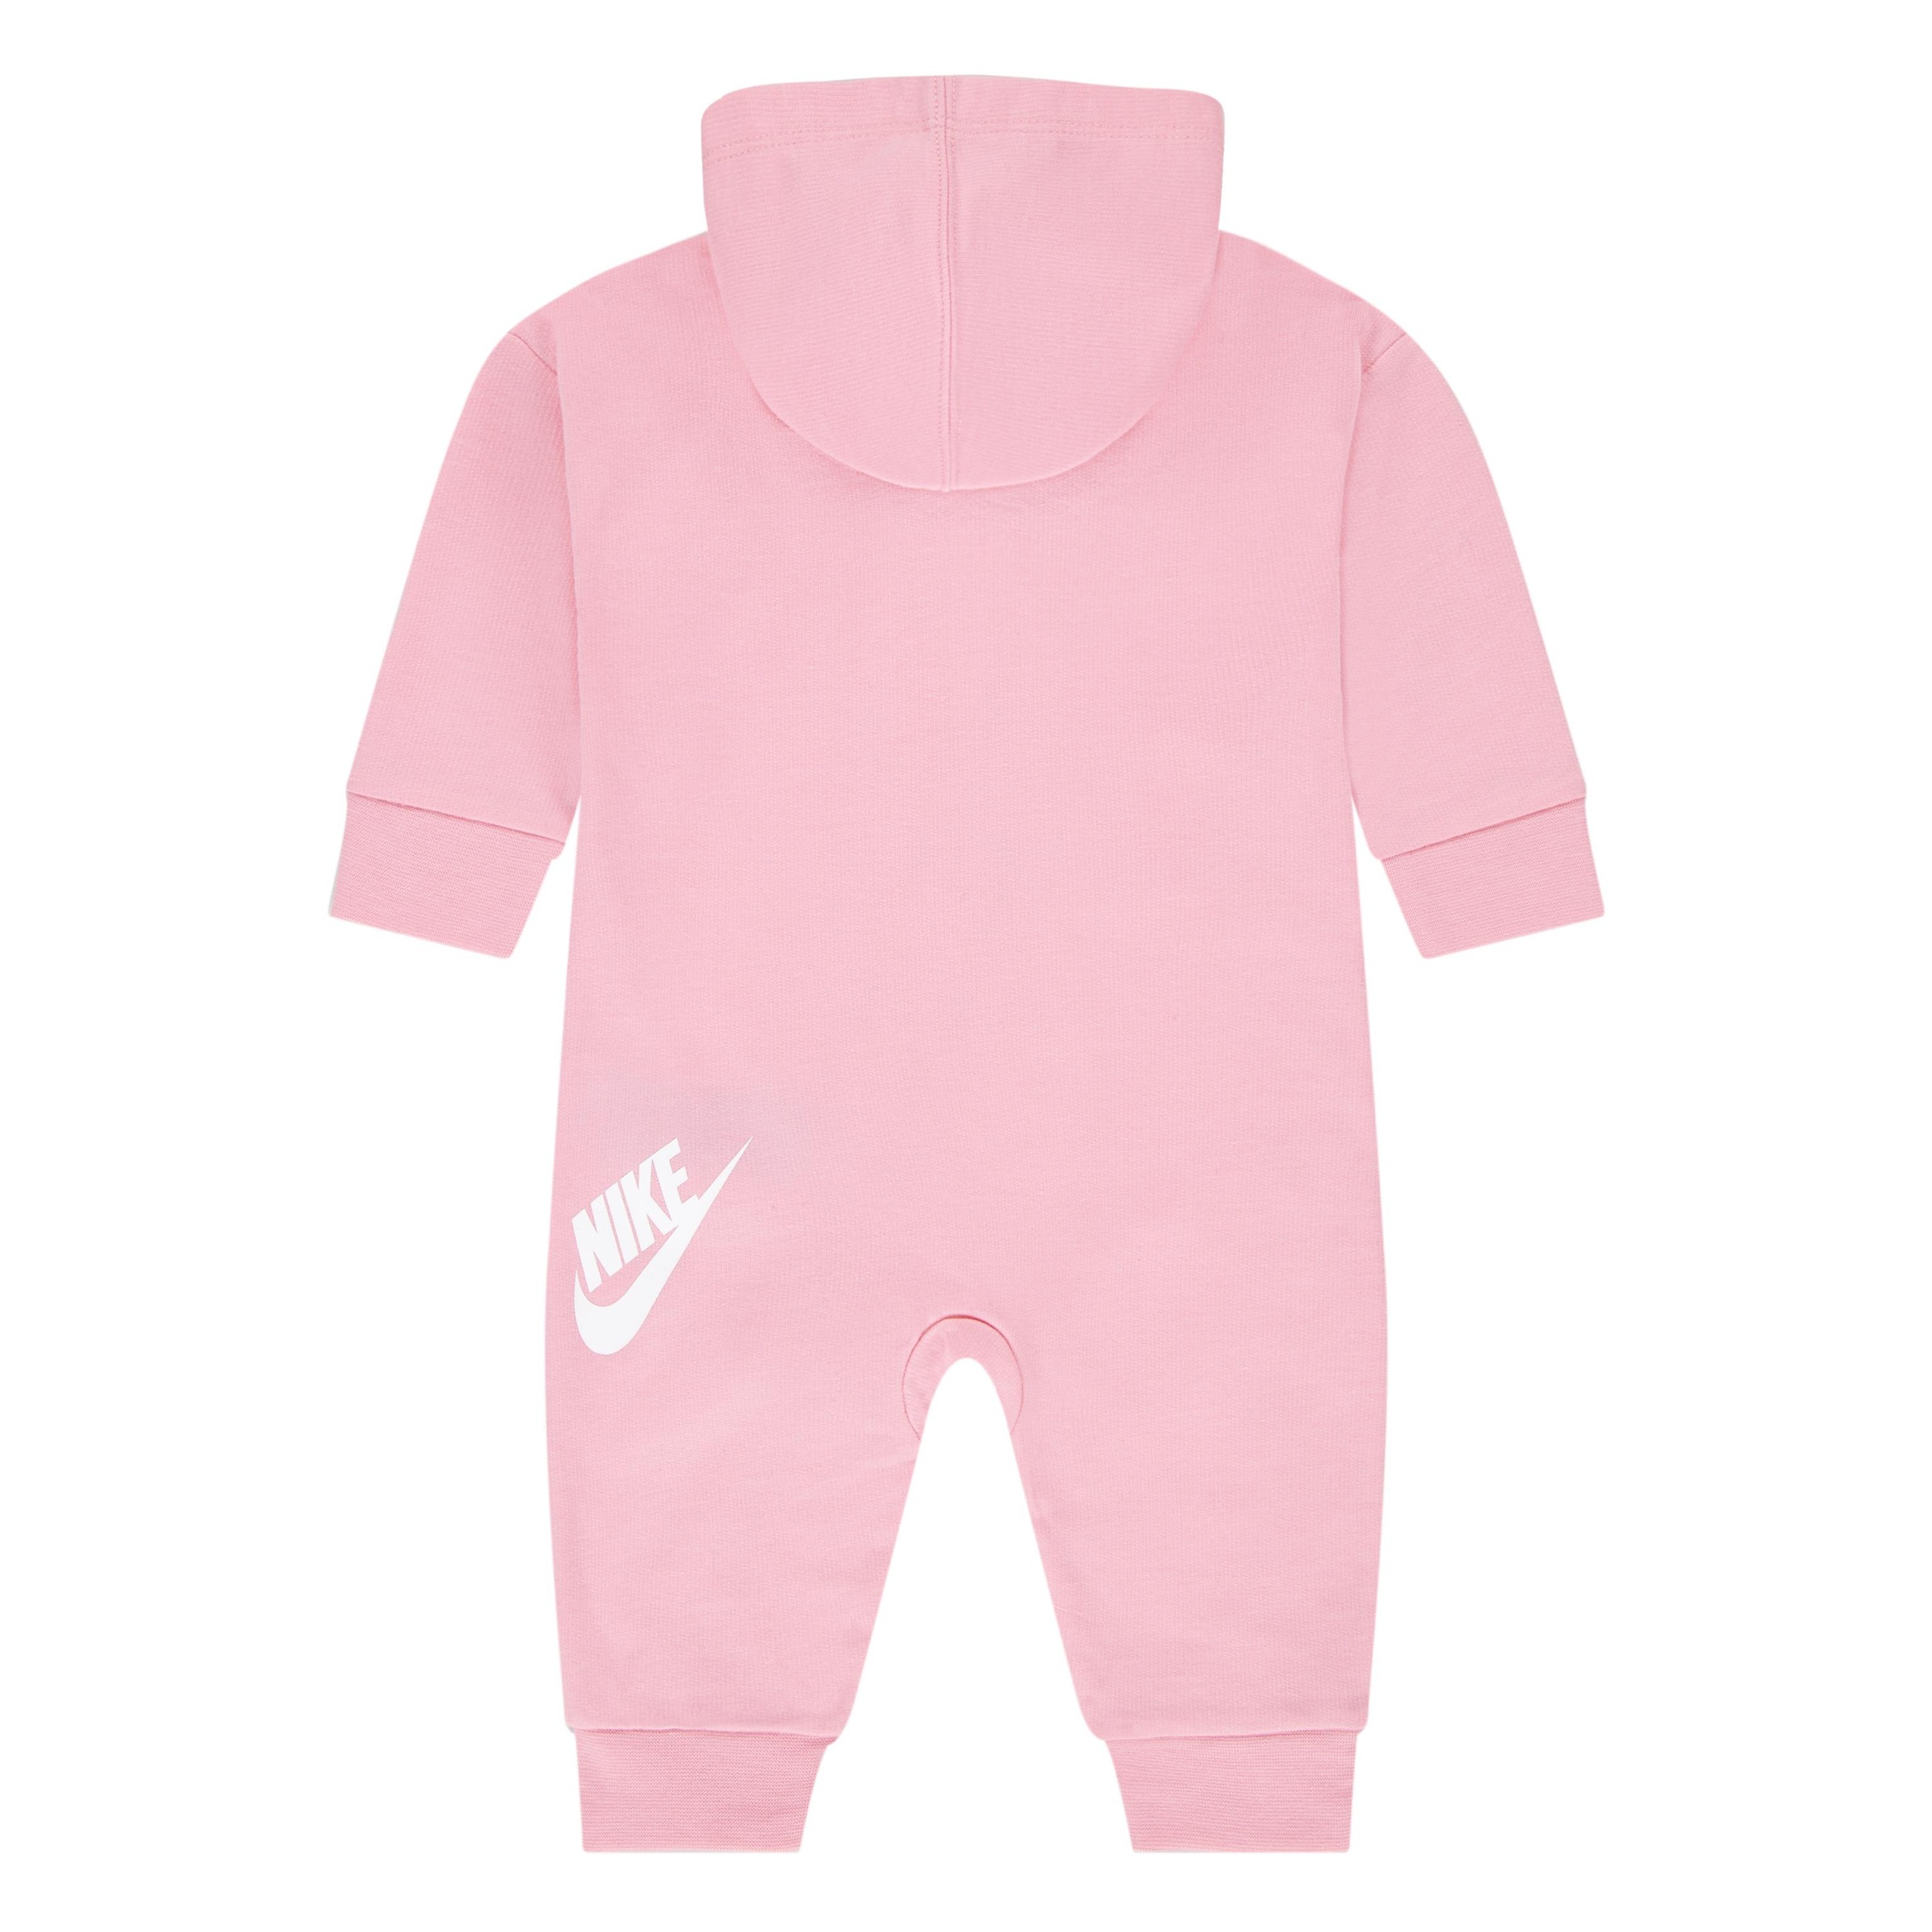 »NKN ALL Sportswear PLAY Nike DAY Jumpsuit COVERALL« online bei OTTO